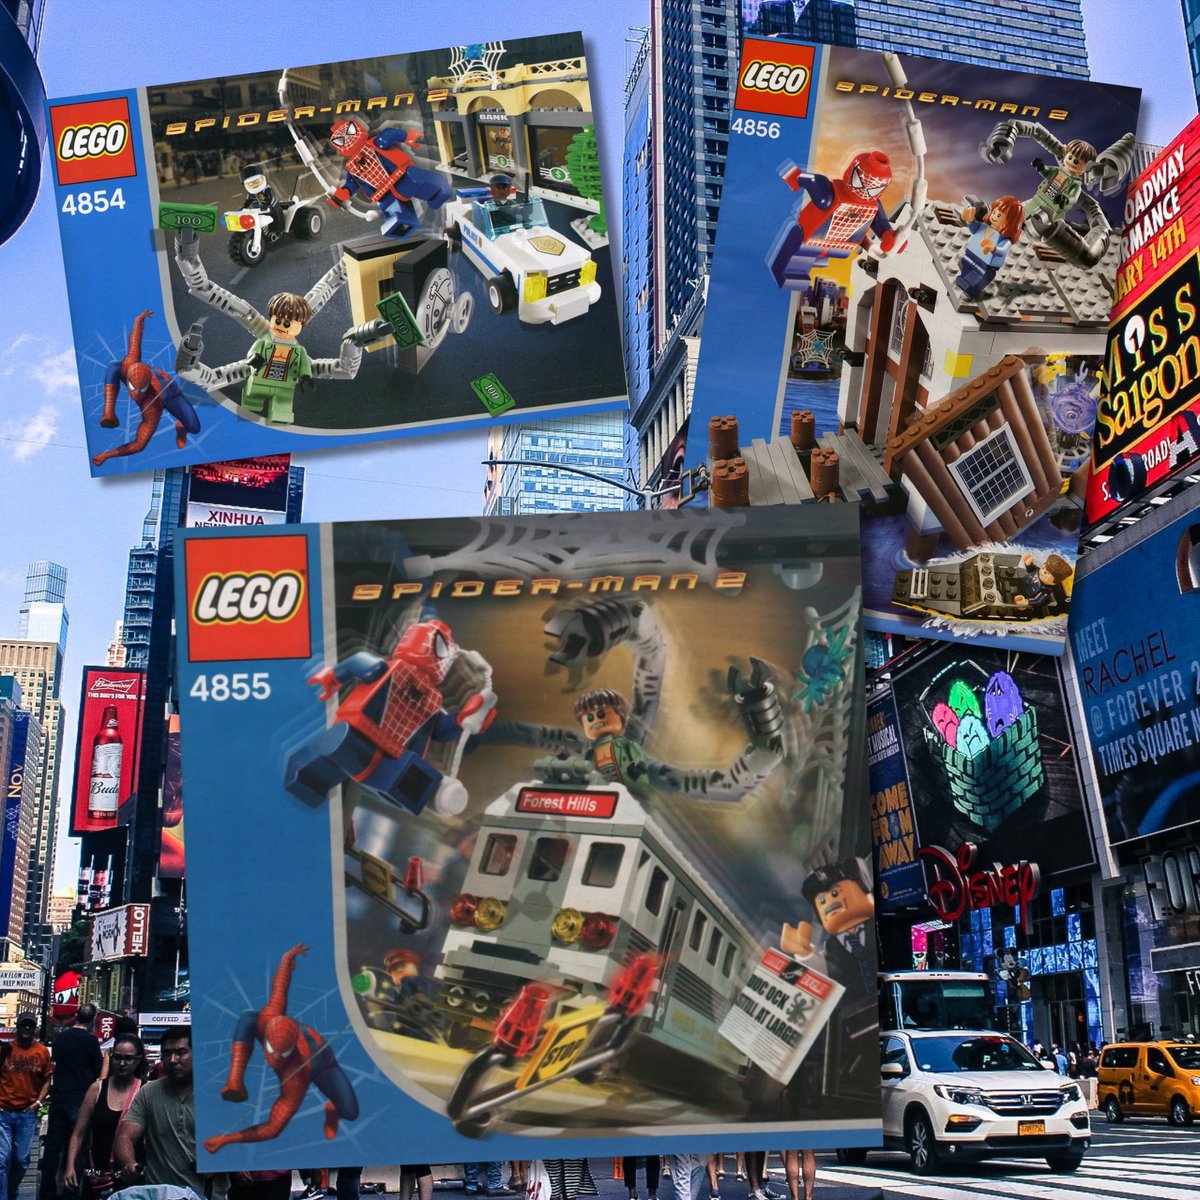 The Spider-Man 2 line-up of sets was an example of a film license done right. Though lower in piece count compared to the models of today, these were well-done, action-packed playsets that could fit into a city with minor tweaking. #LEGO #SpiderMan #Marvel @MarvelStudios @Sony